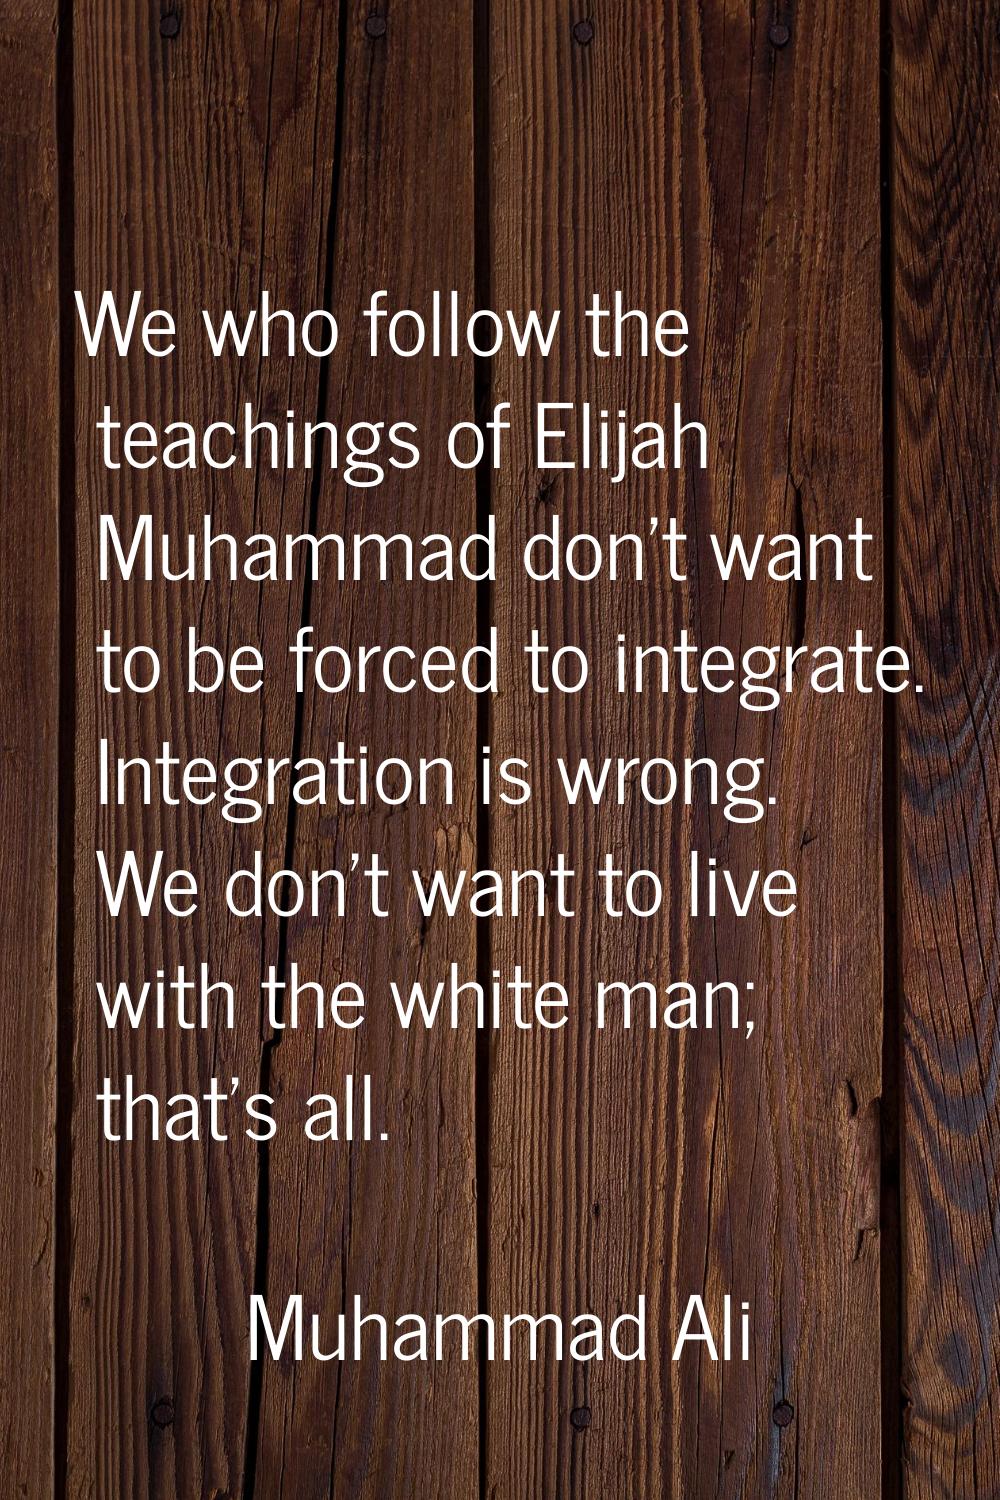 We who follow the teachings of Elijah Muhammad don't want to be forced to integrate. Integration is